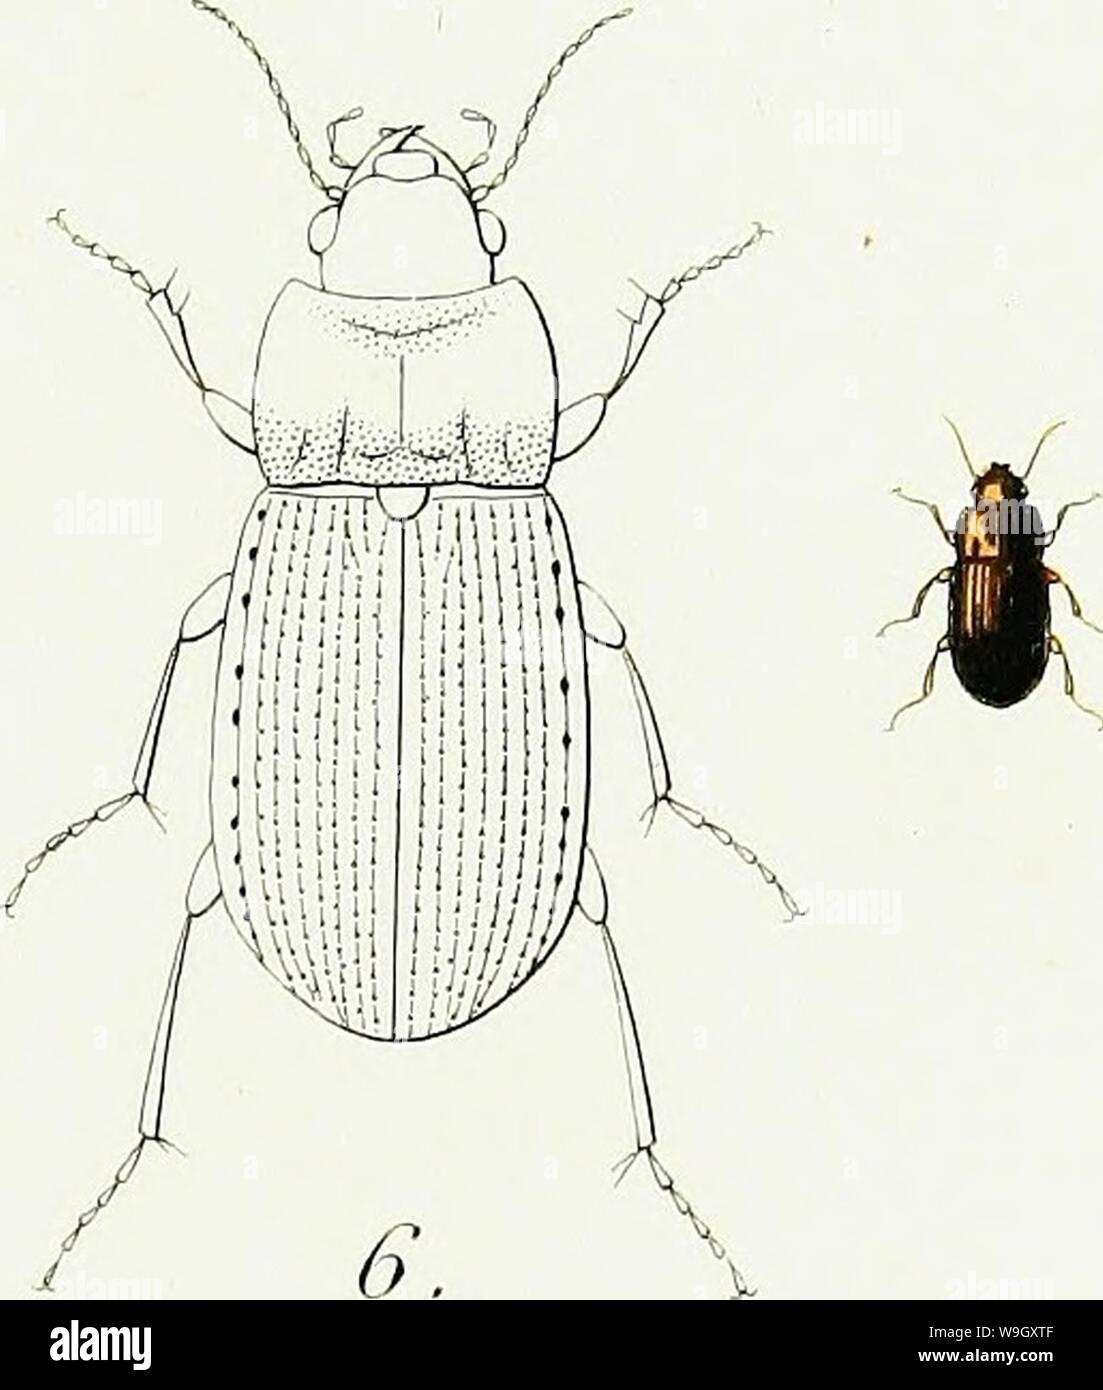 Archive image from page 400 of Iconographie et histoire naturelle des. Iconographie et histoire naturelle des coléoptères d'Europe;  CUbiodiversity1128626-9556 Year: 1829 ( 1. A. Inirma. 2. A. Rotimdata 3. A. Brevis. 4 • A. Siniplex. 5 . A. Eximia . 6. A. Dalmatiua. Stock Photo